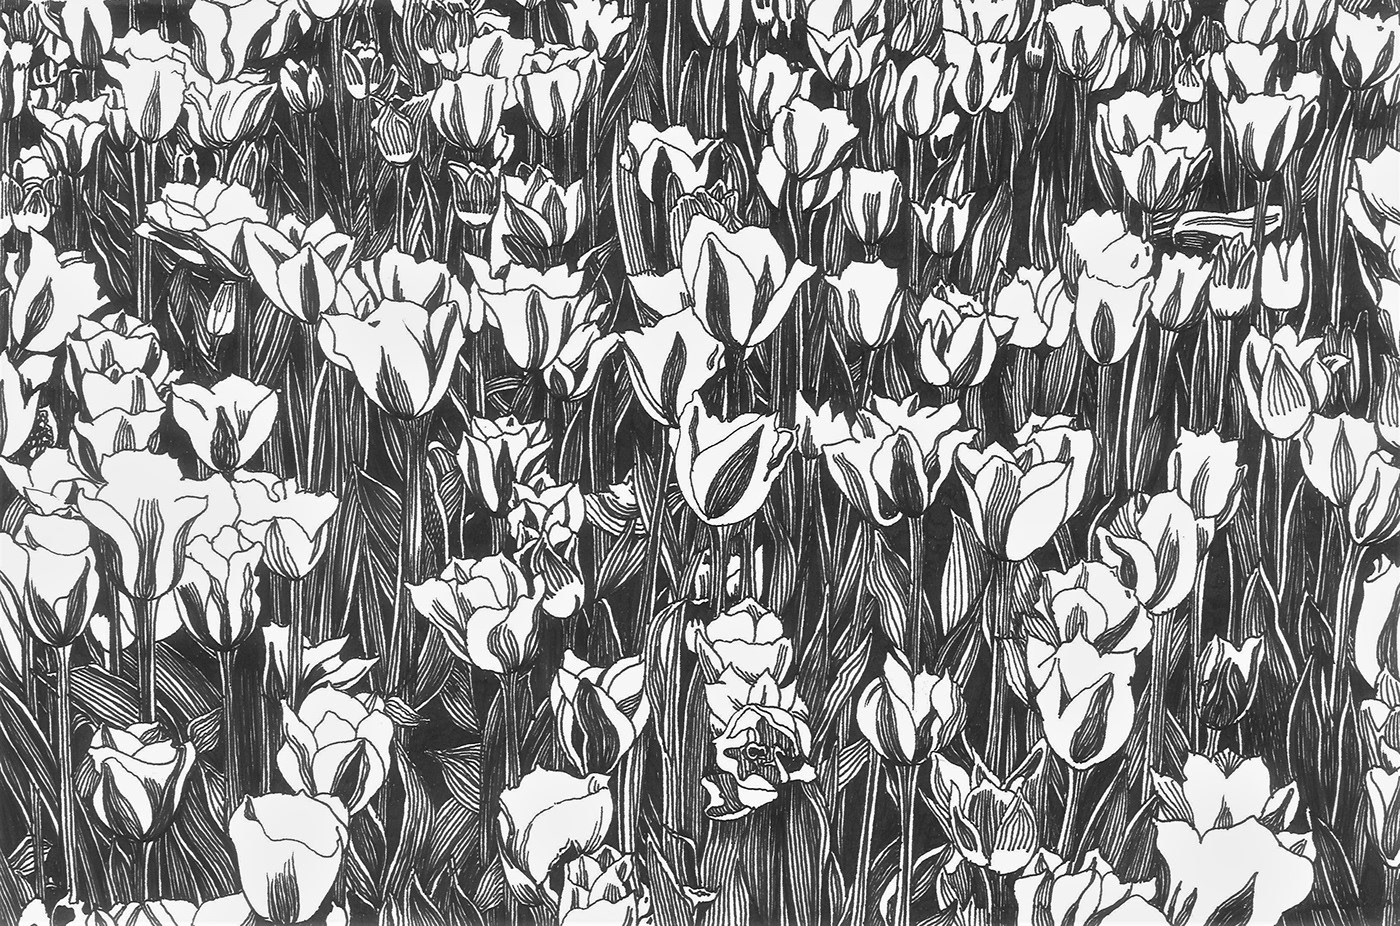 ink drawings floral art nature design Hand made drawings mastery drawing tulips nature patterns decorative art contemporary drawing artwork on paper